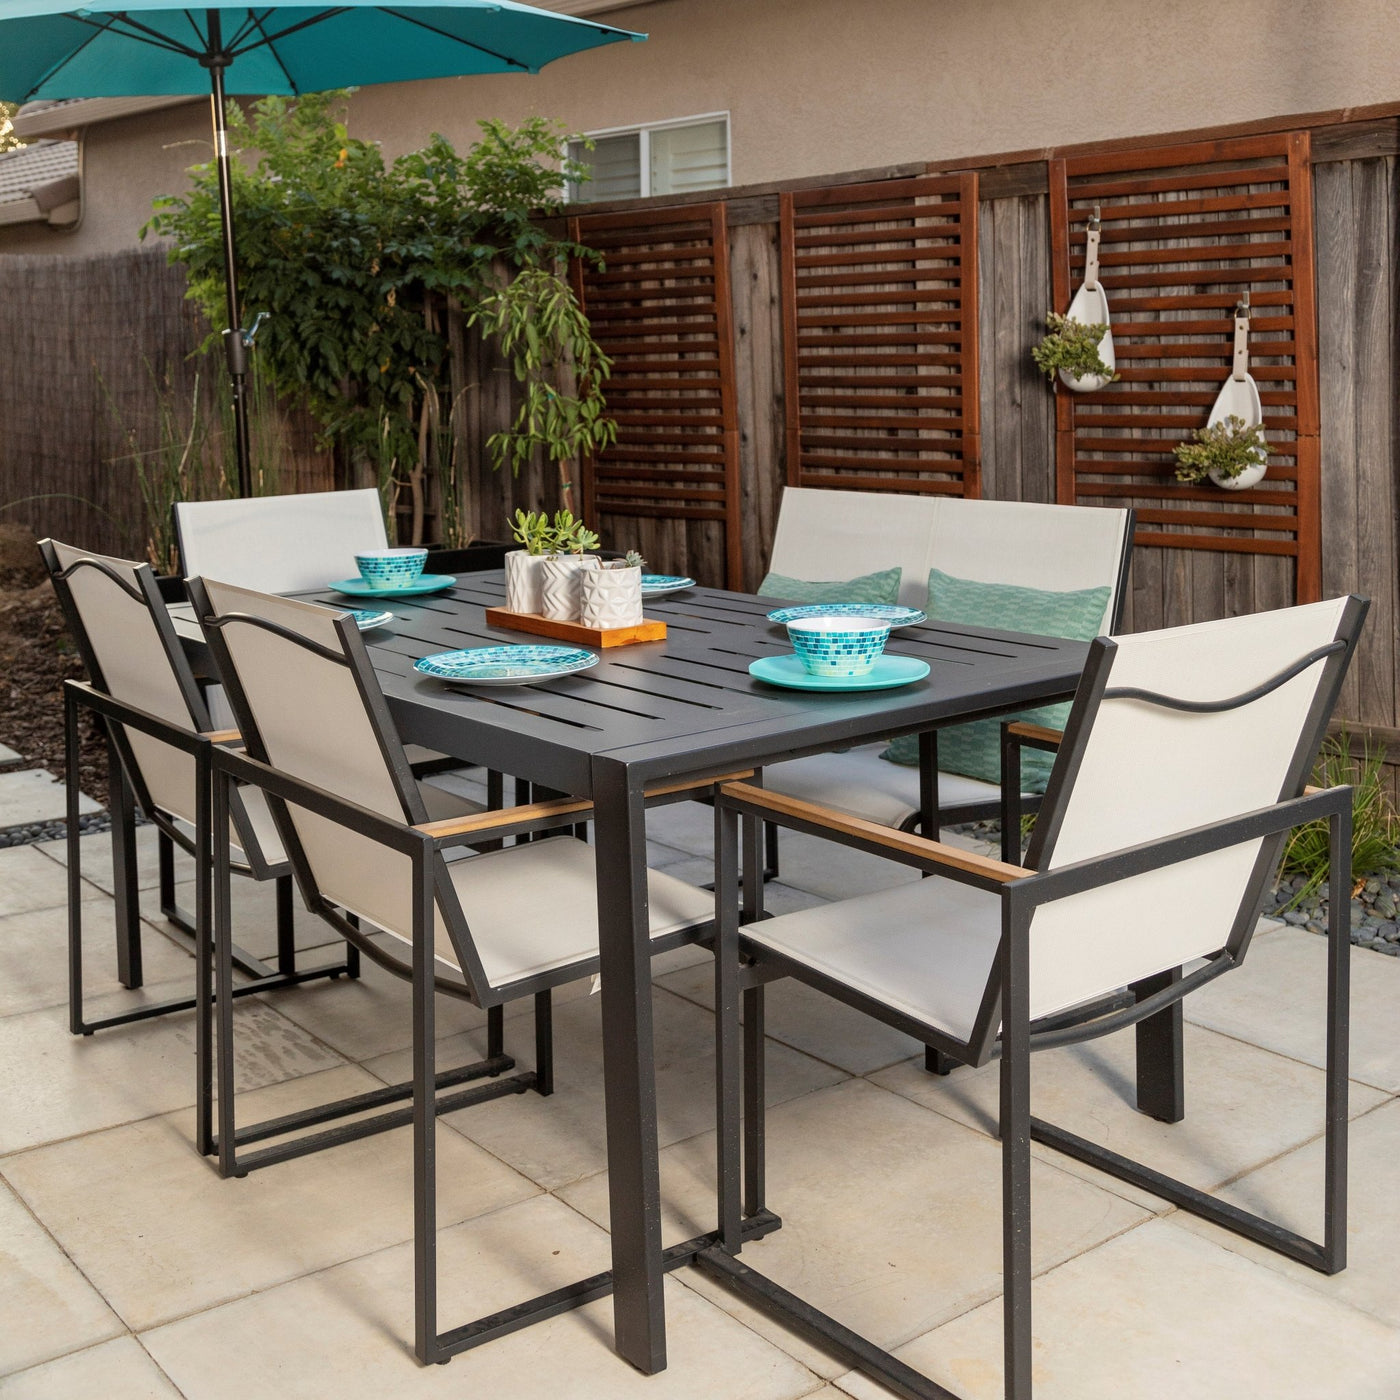 Dining Furniture - Outdoor Space Designs